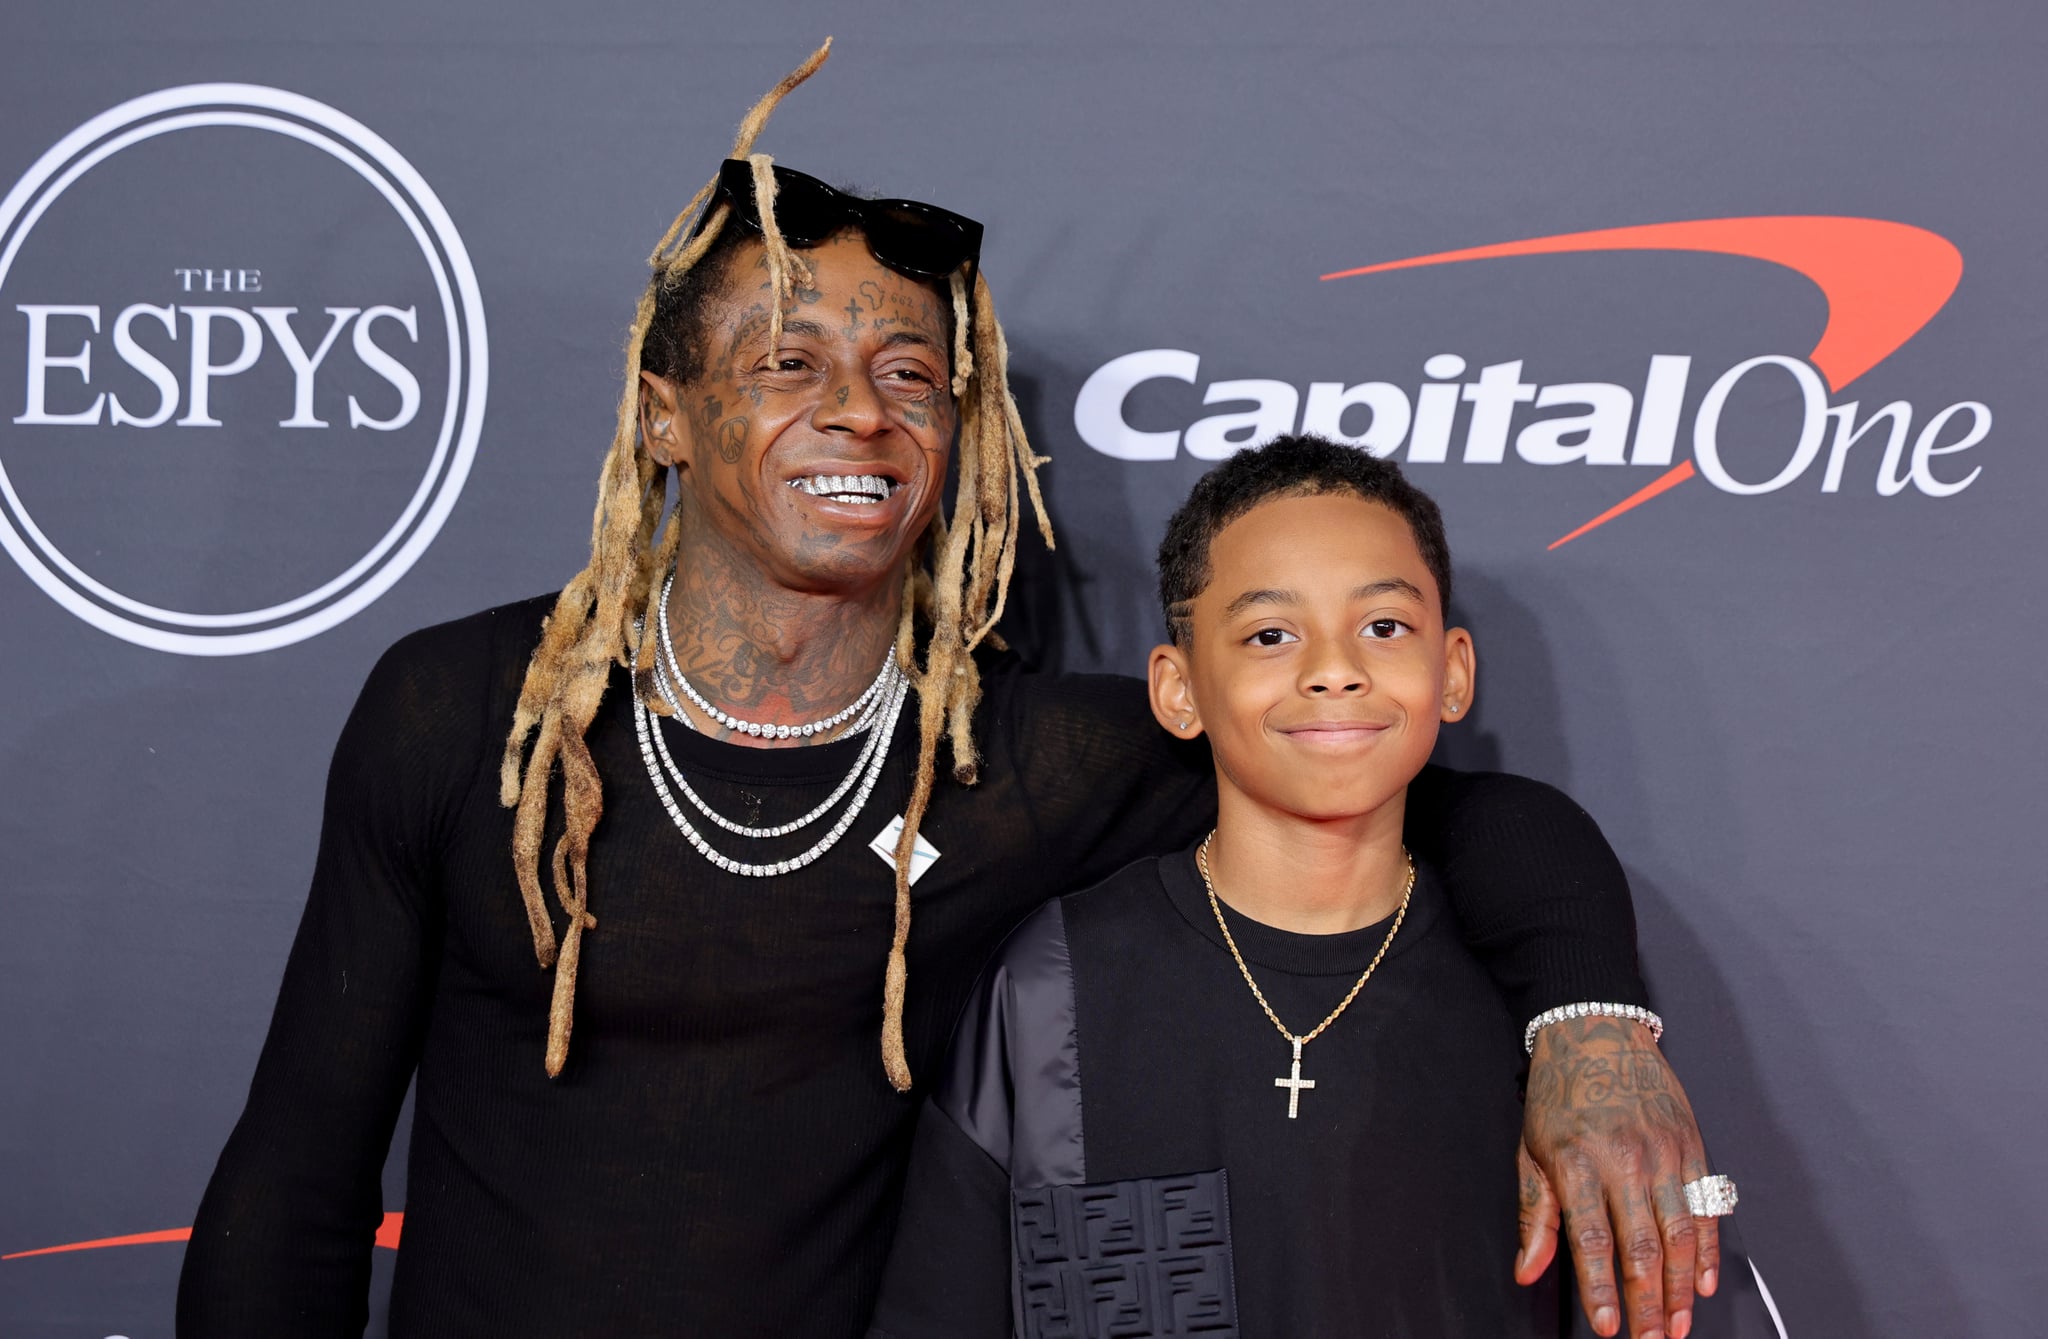 HOLLYWOOD, CALIFORNIA - JULY 20: (L-R) Lil Wayne and Kameron Carter attend the 2022 ESPYs at Dolby Theatre on July 20, 2022 in Hollywood, California. (Photo by Momodu Mansaray/WireImage)